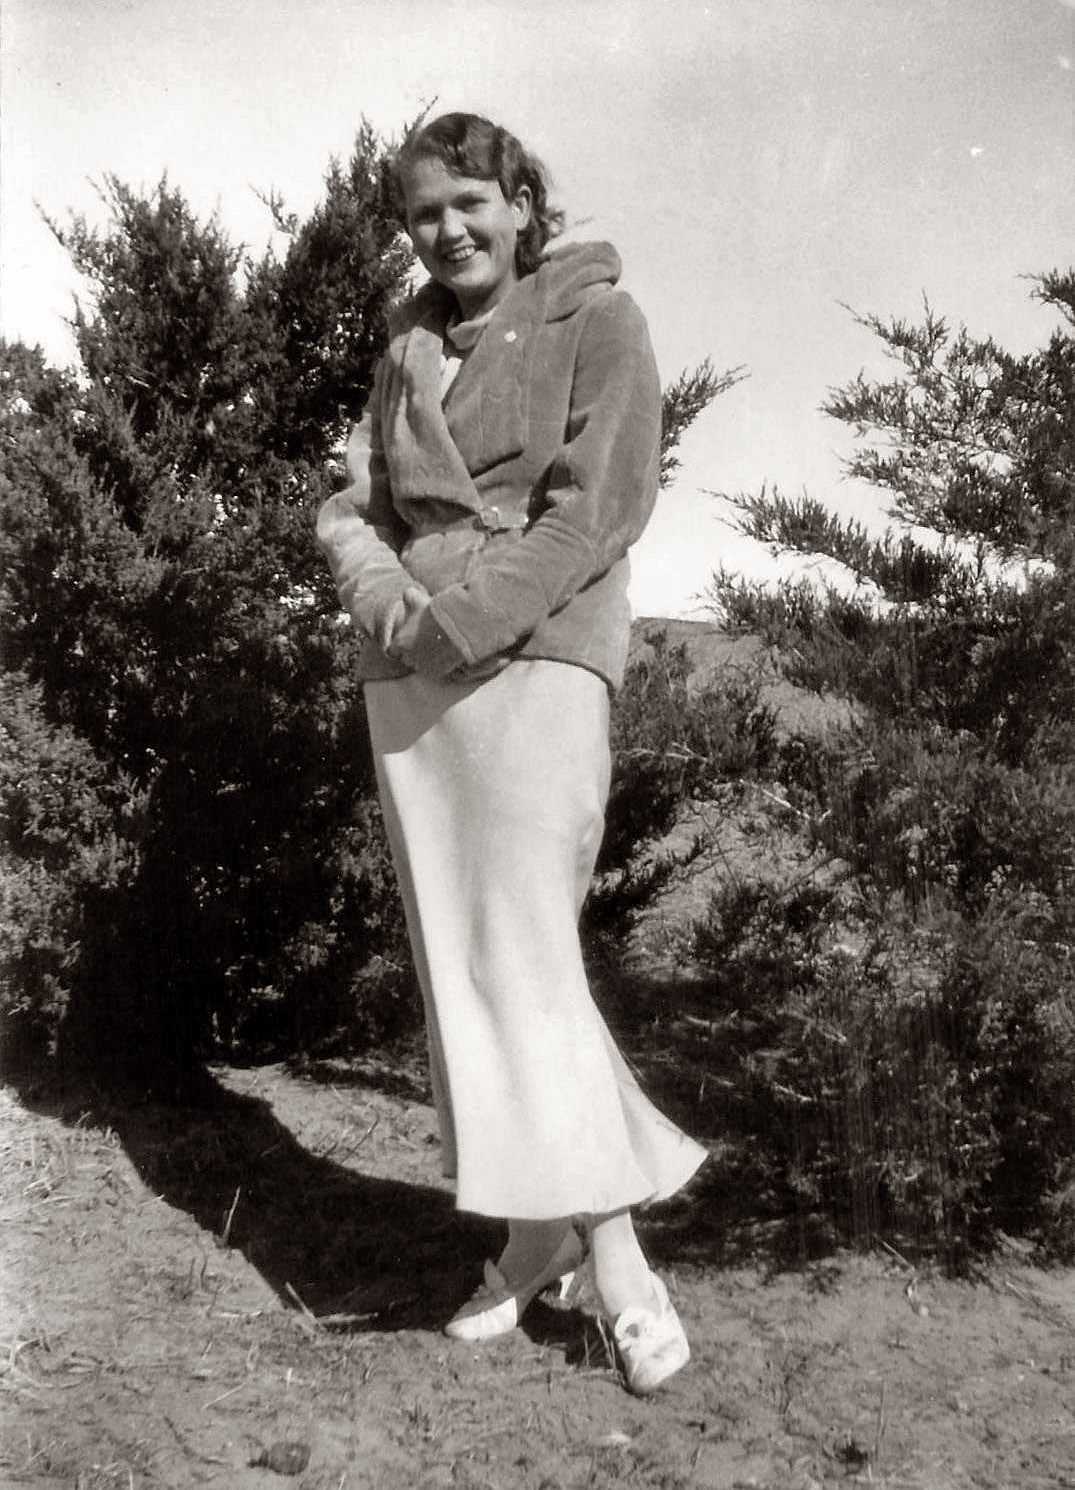 Violet Mae Phillips in the spring of 1934, at or near the family farm in Cherry County, Nebraska. A few months after this picture was taken, Violet was shot and killed by her father George.